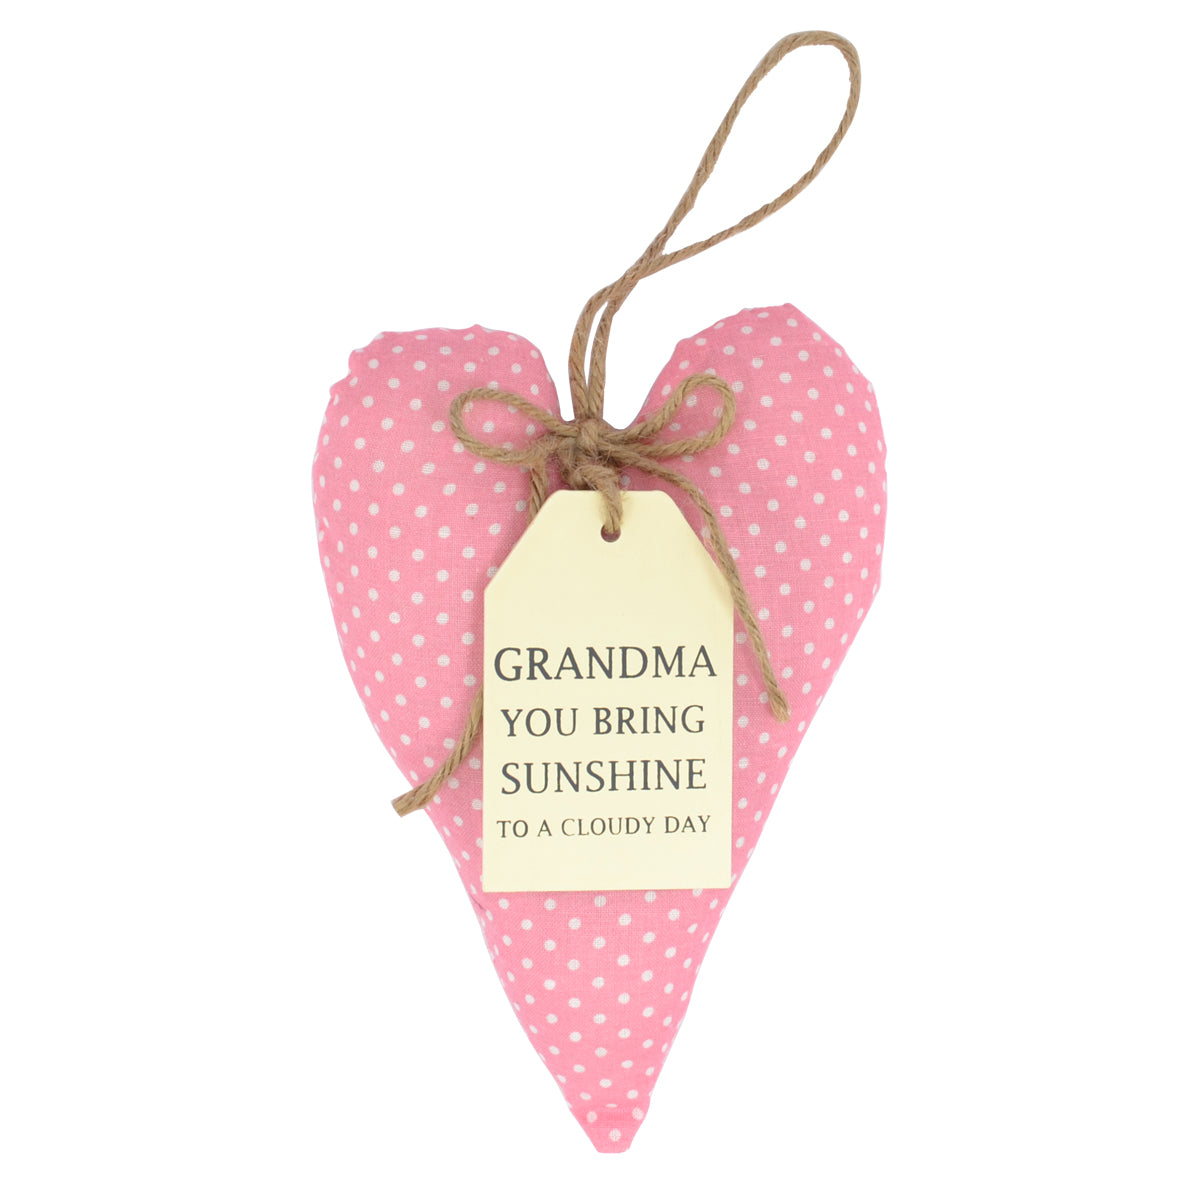 Special Grandma Sentiments From The Heart Hanging Cushion